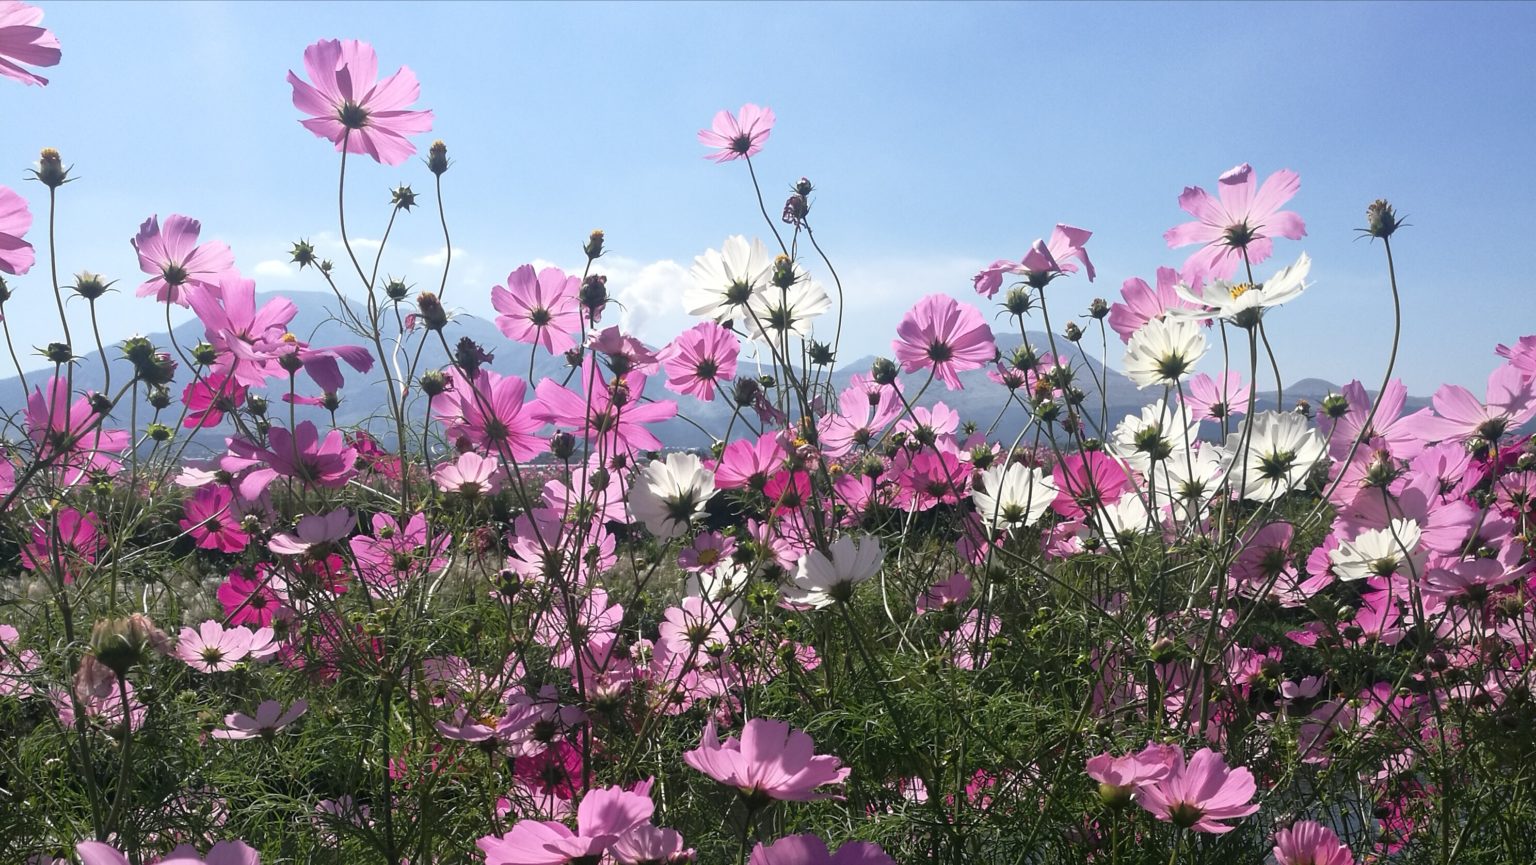 Japan's countryside scenes in October are tinted with the colors and grace of akizakura cosmos flowers.